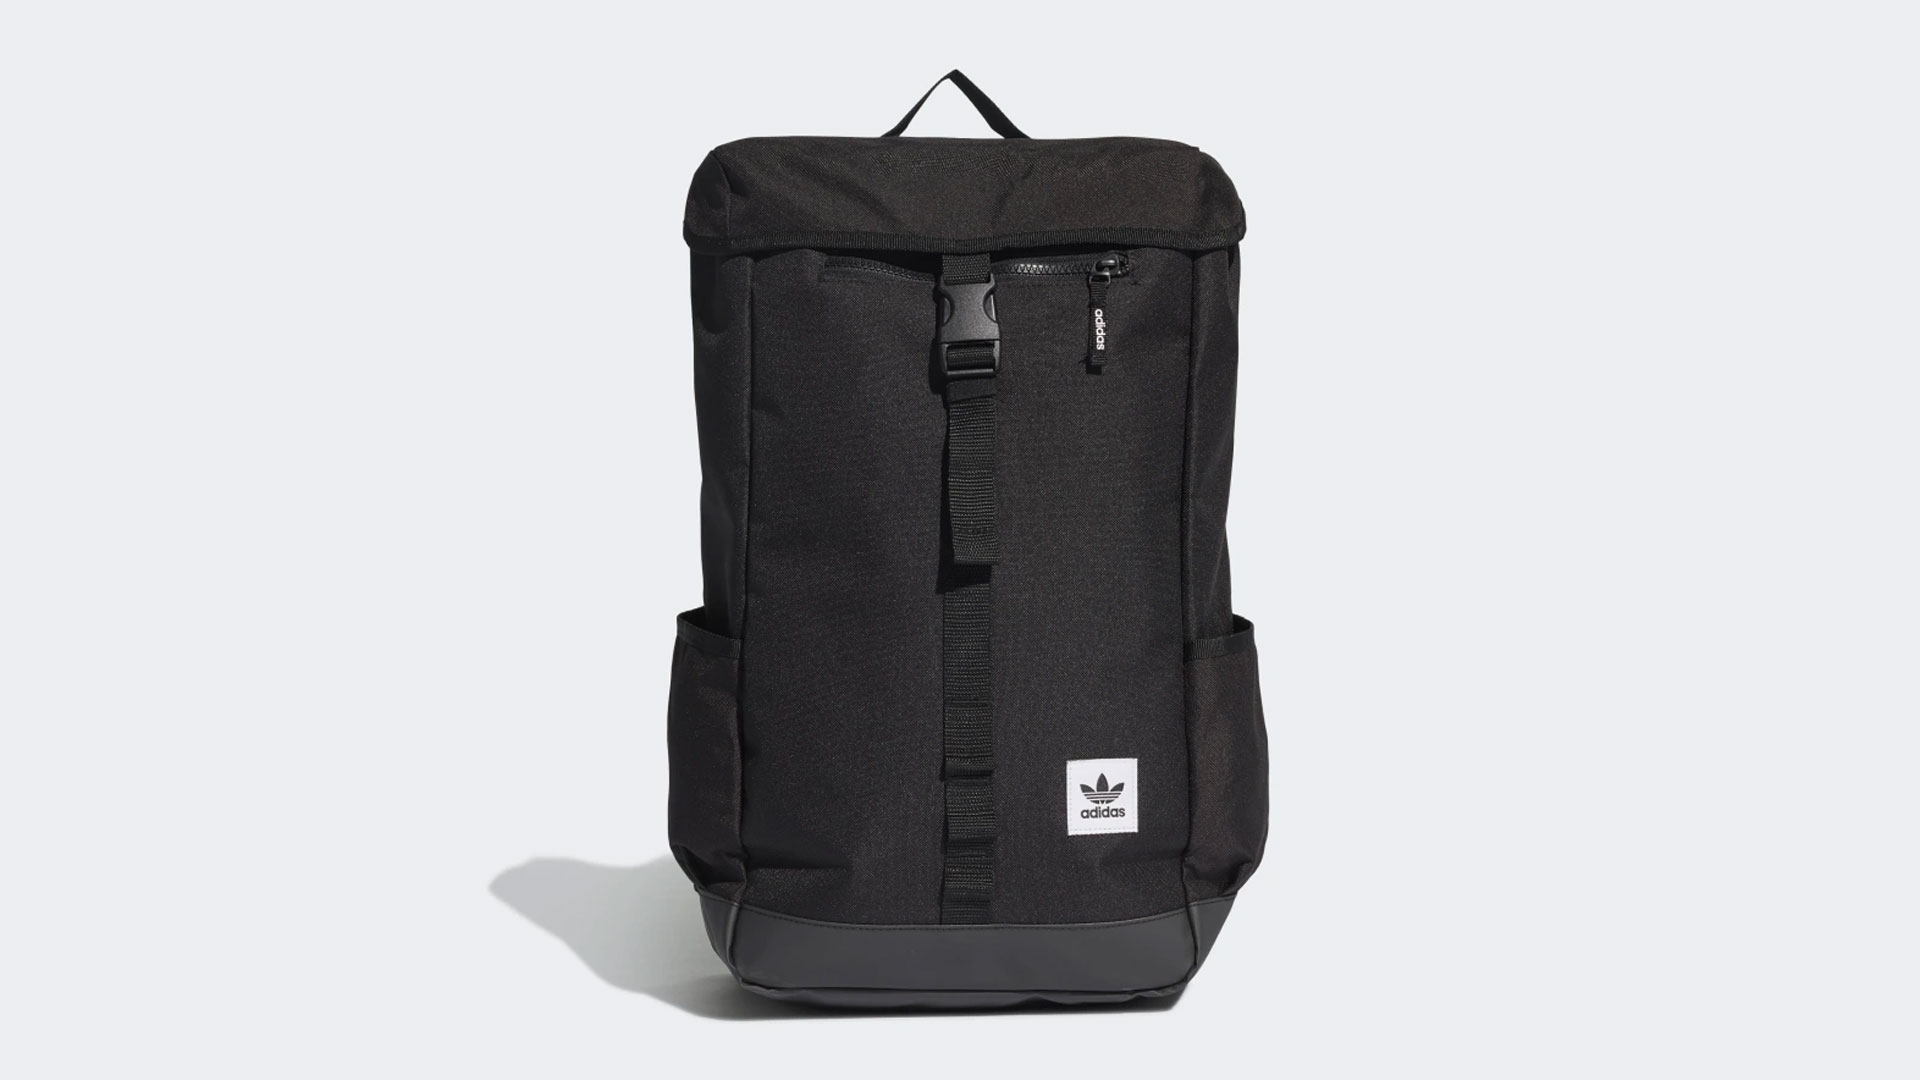 Best Adidas Backpacks: 5 Great Options to Consider 5